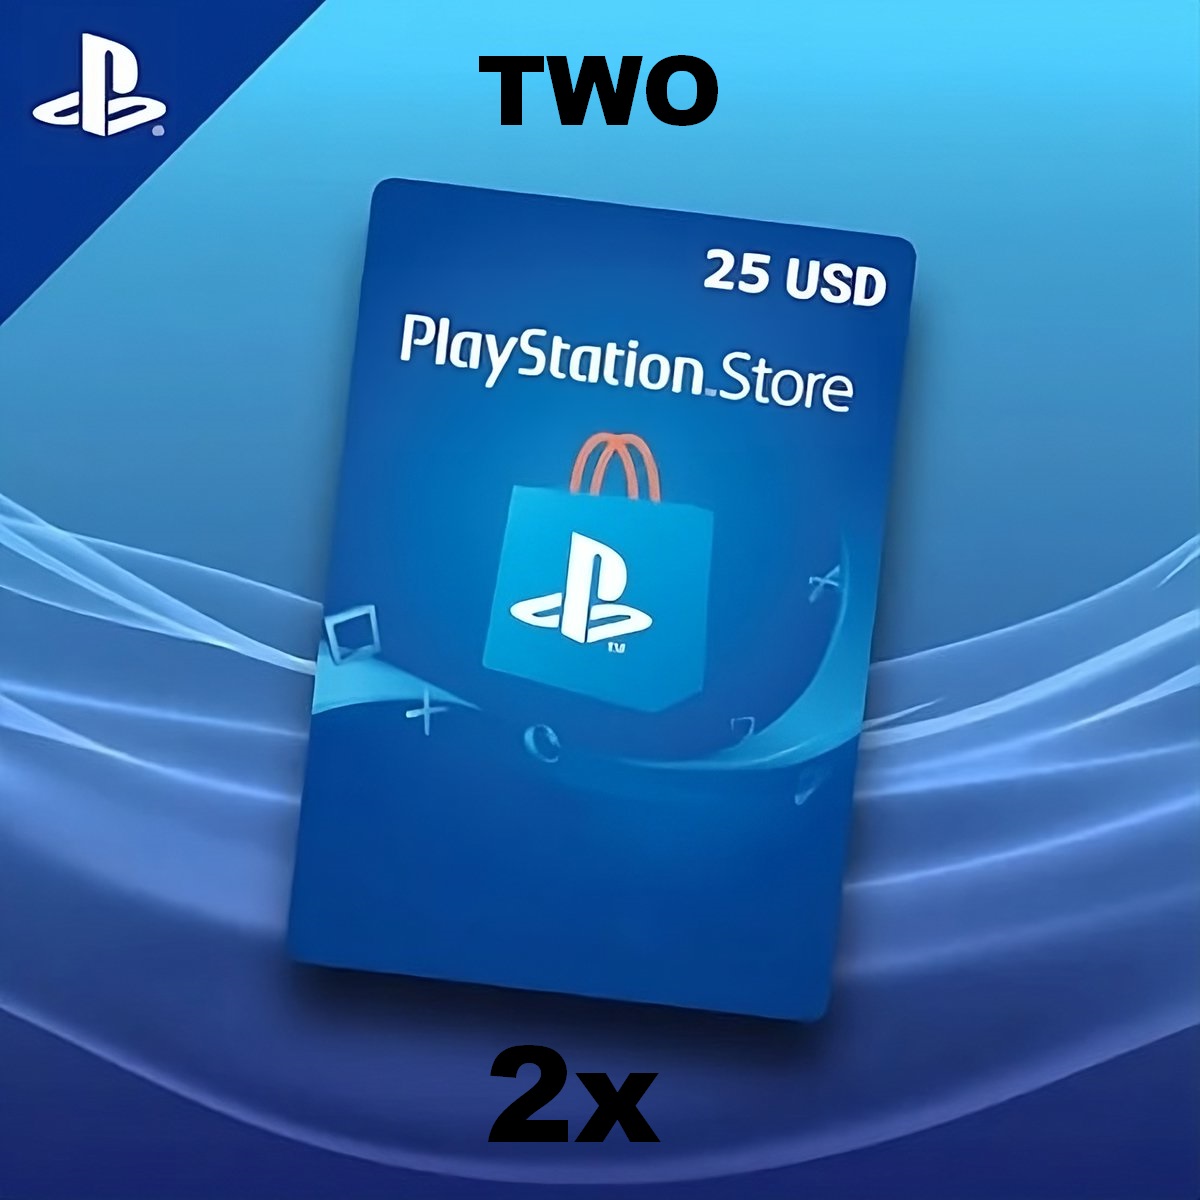 LIGHTNING ROUND GIVEAWAY (24 Hour Giveaway): I'm giving away: ⚫TWO $25 Dollar PlayStation Store cards! To ENTER: 1️⃣Follow 2️⃣Like & Retweet 3️⃣Comment what you wanna buy! Winners will be announced TOMORROW (May 2nd) at 6PM PST #Giveaways #PlayStation #Giveaway #GiveawayAlert…